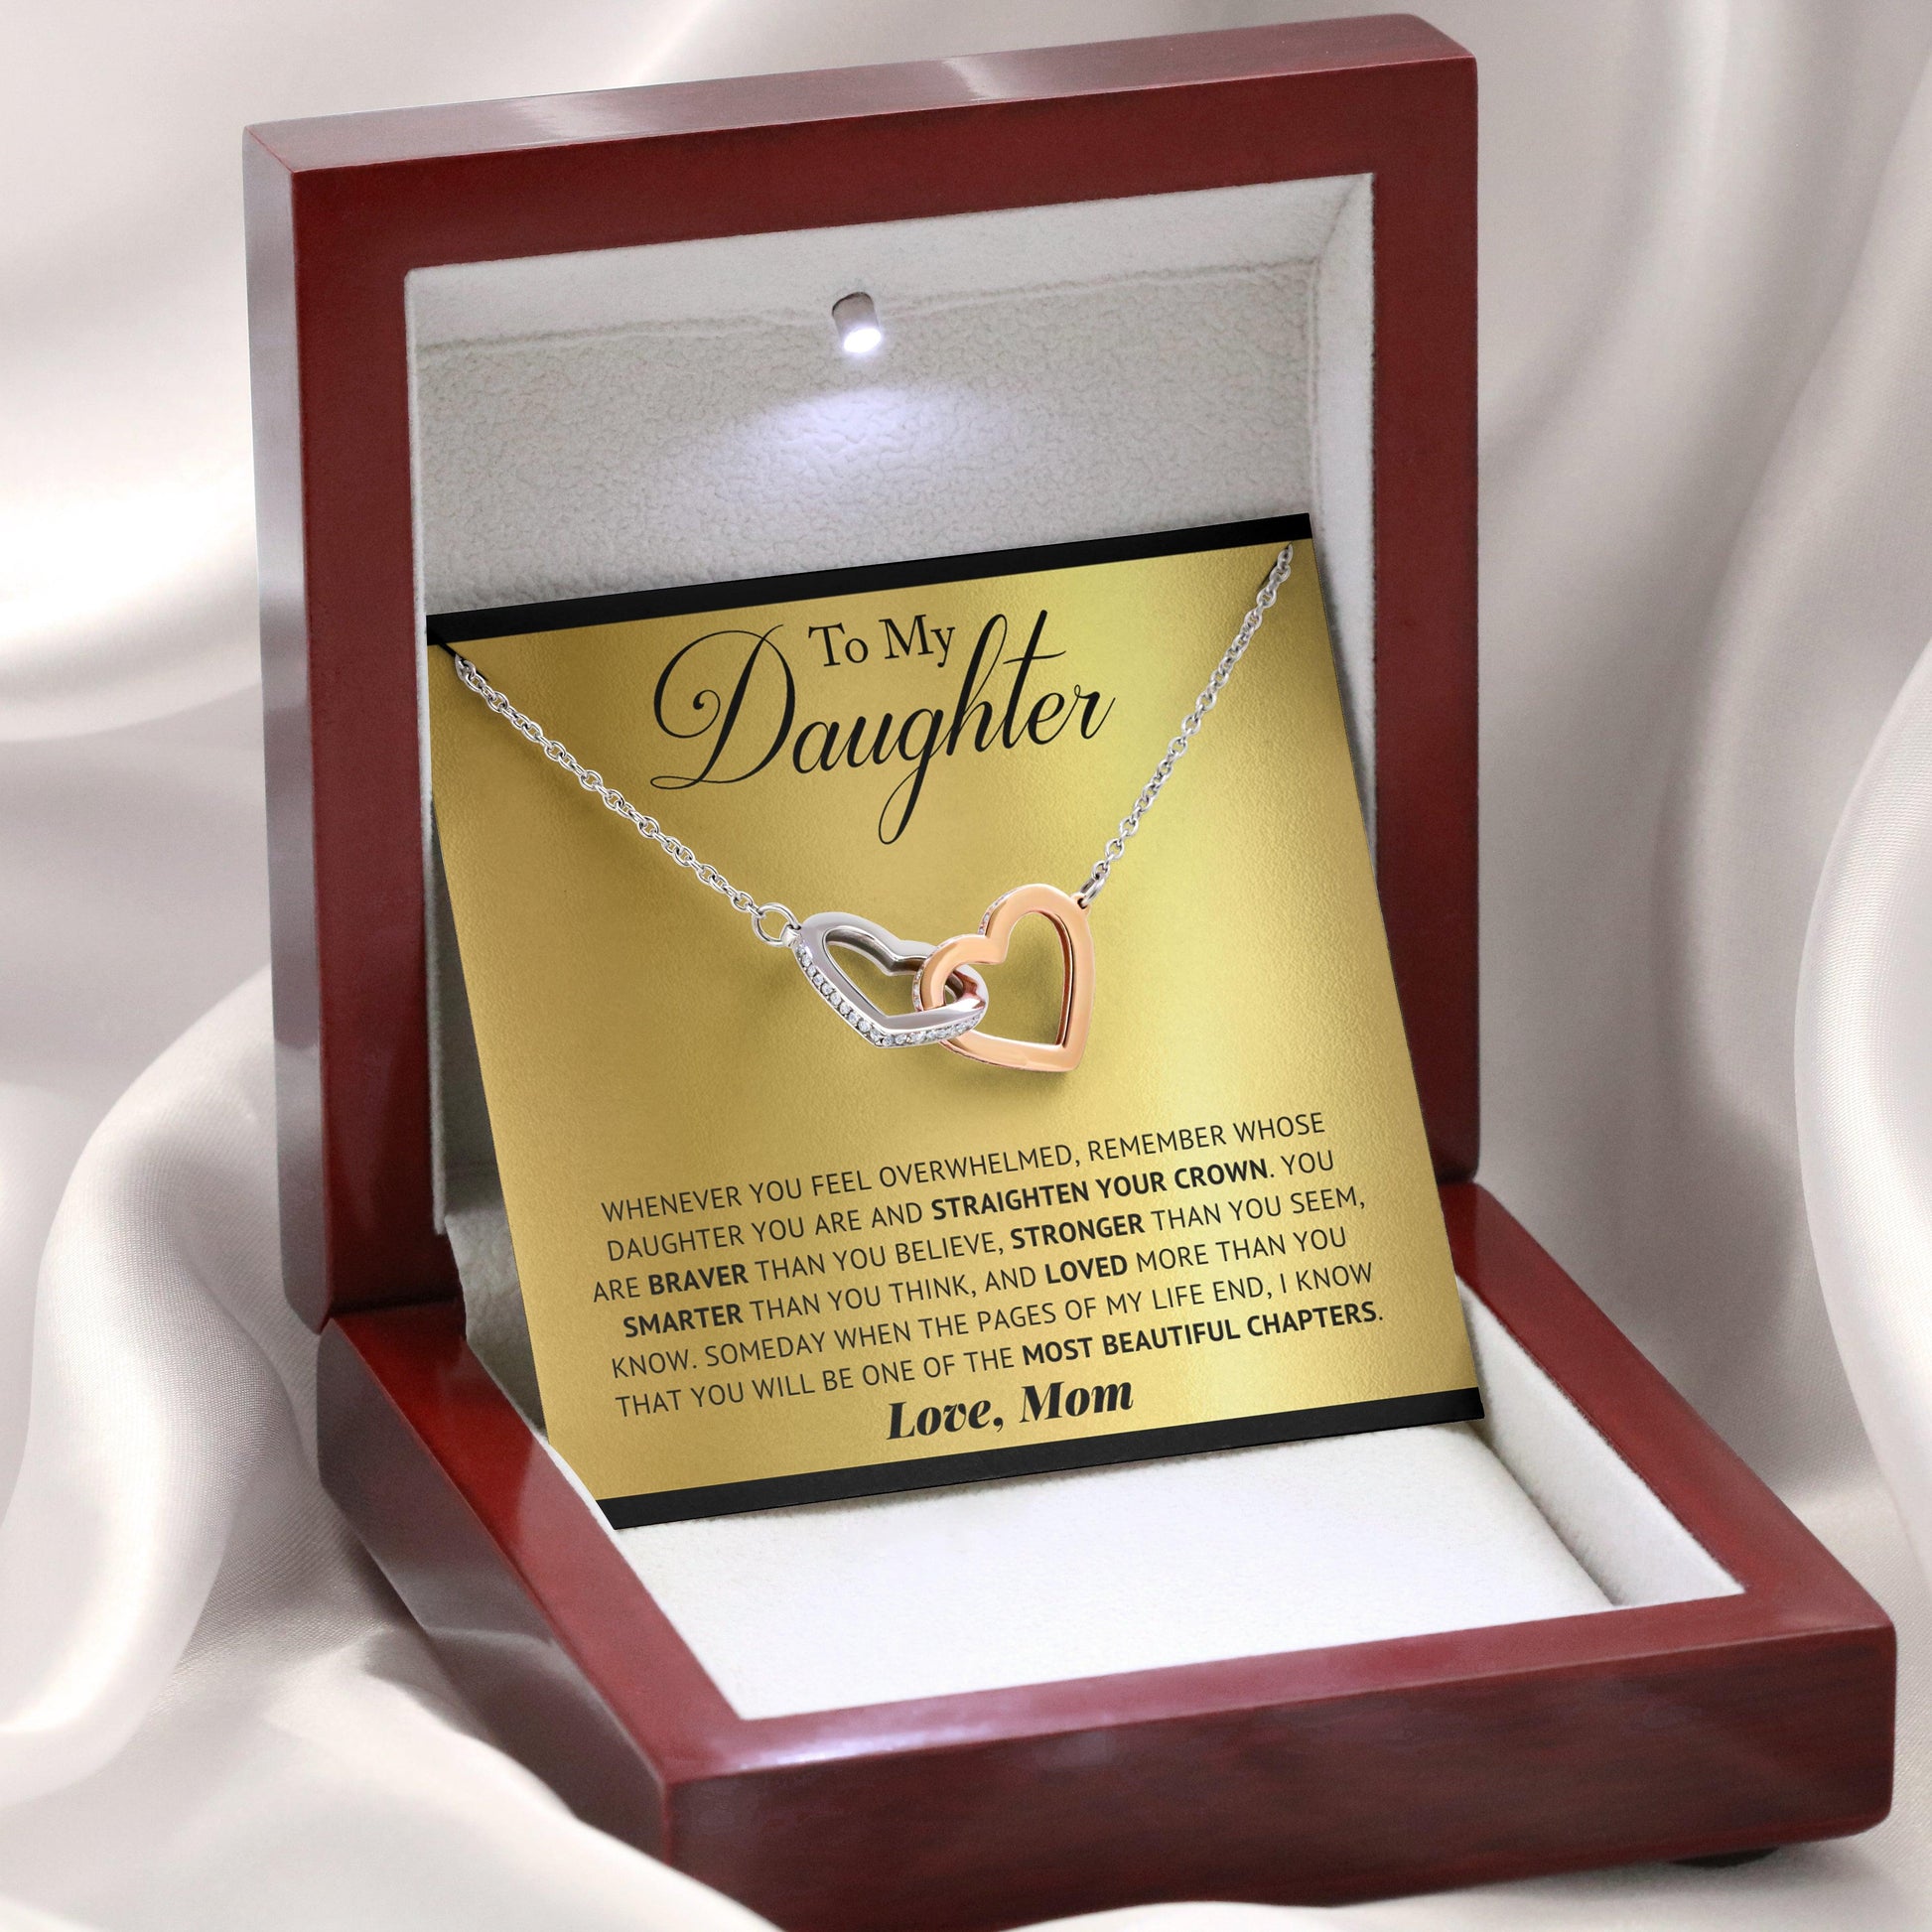 Jewelry gifts Daughter - Pages Of My Life - Interlocking Hearts Necklace - Belesmé - Memorable Jewelry Gifts